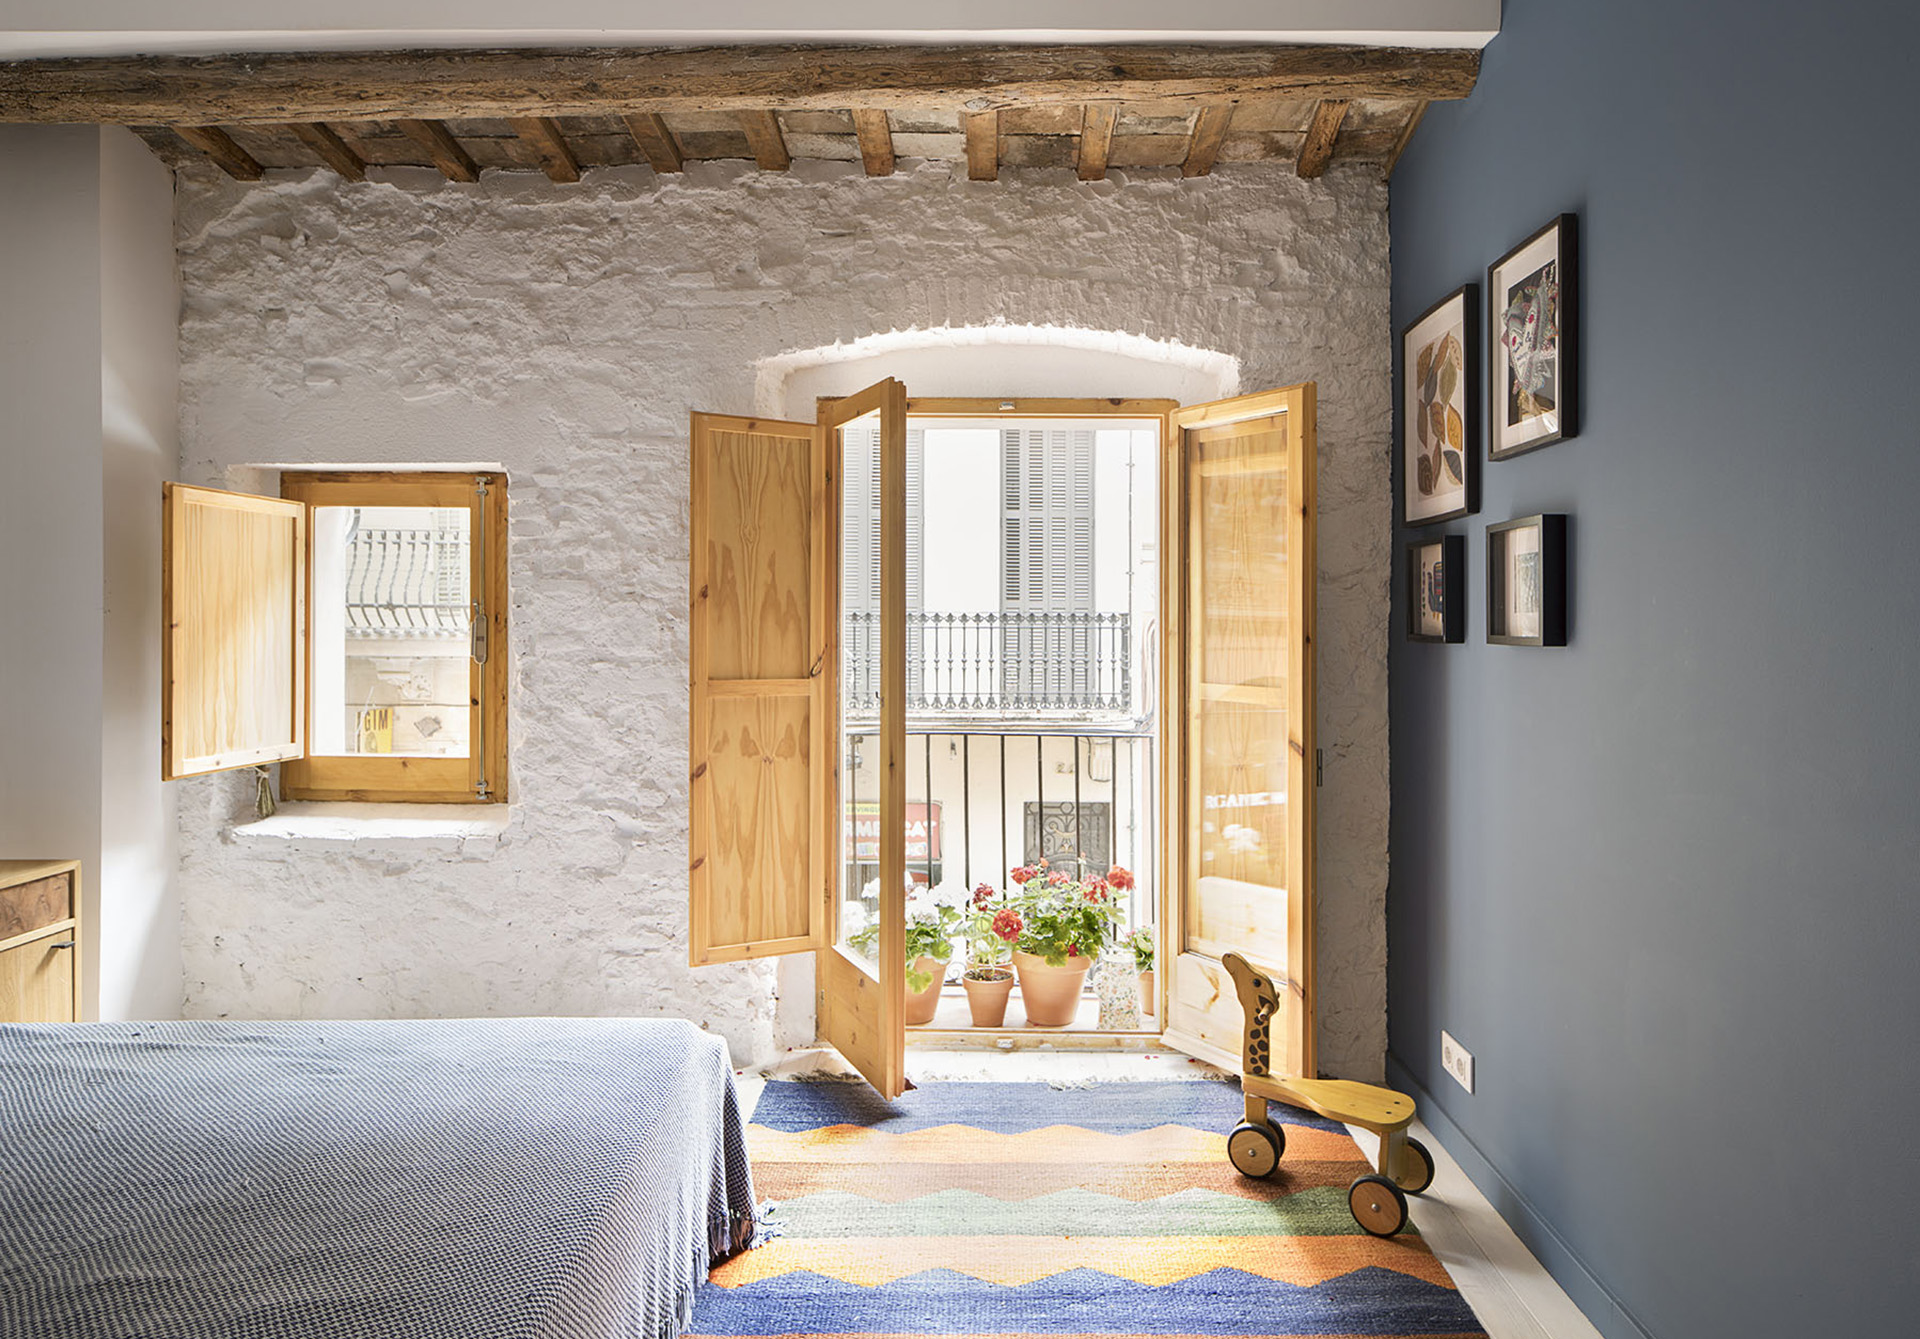 A total renovation of Asturias, a unique townhouse between tradition and modern elegance